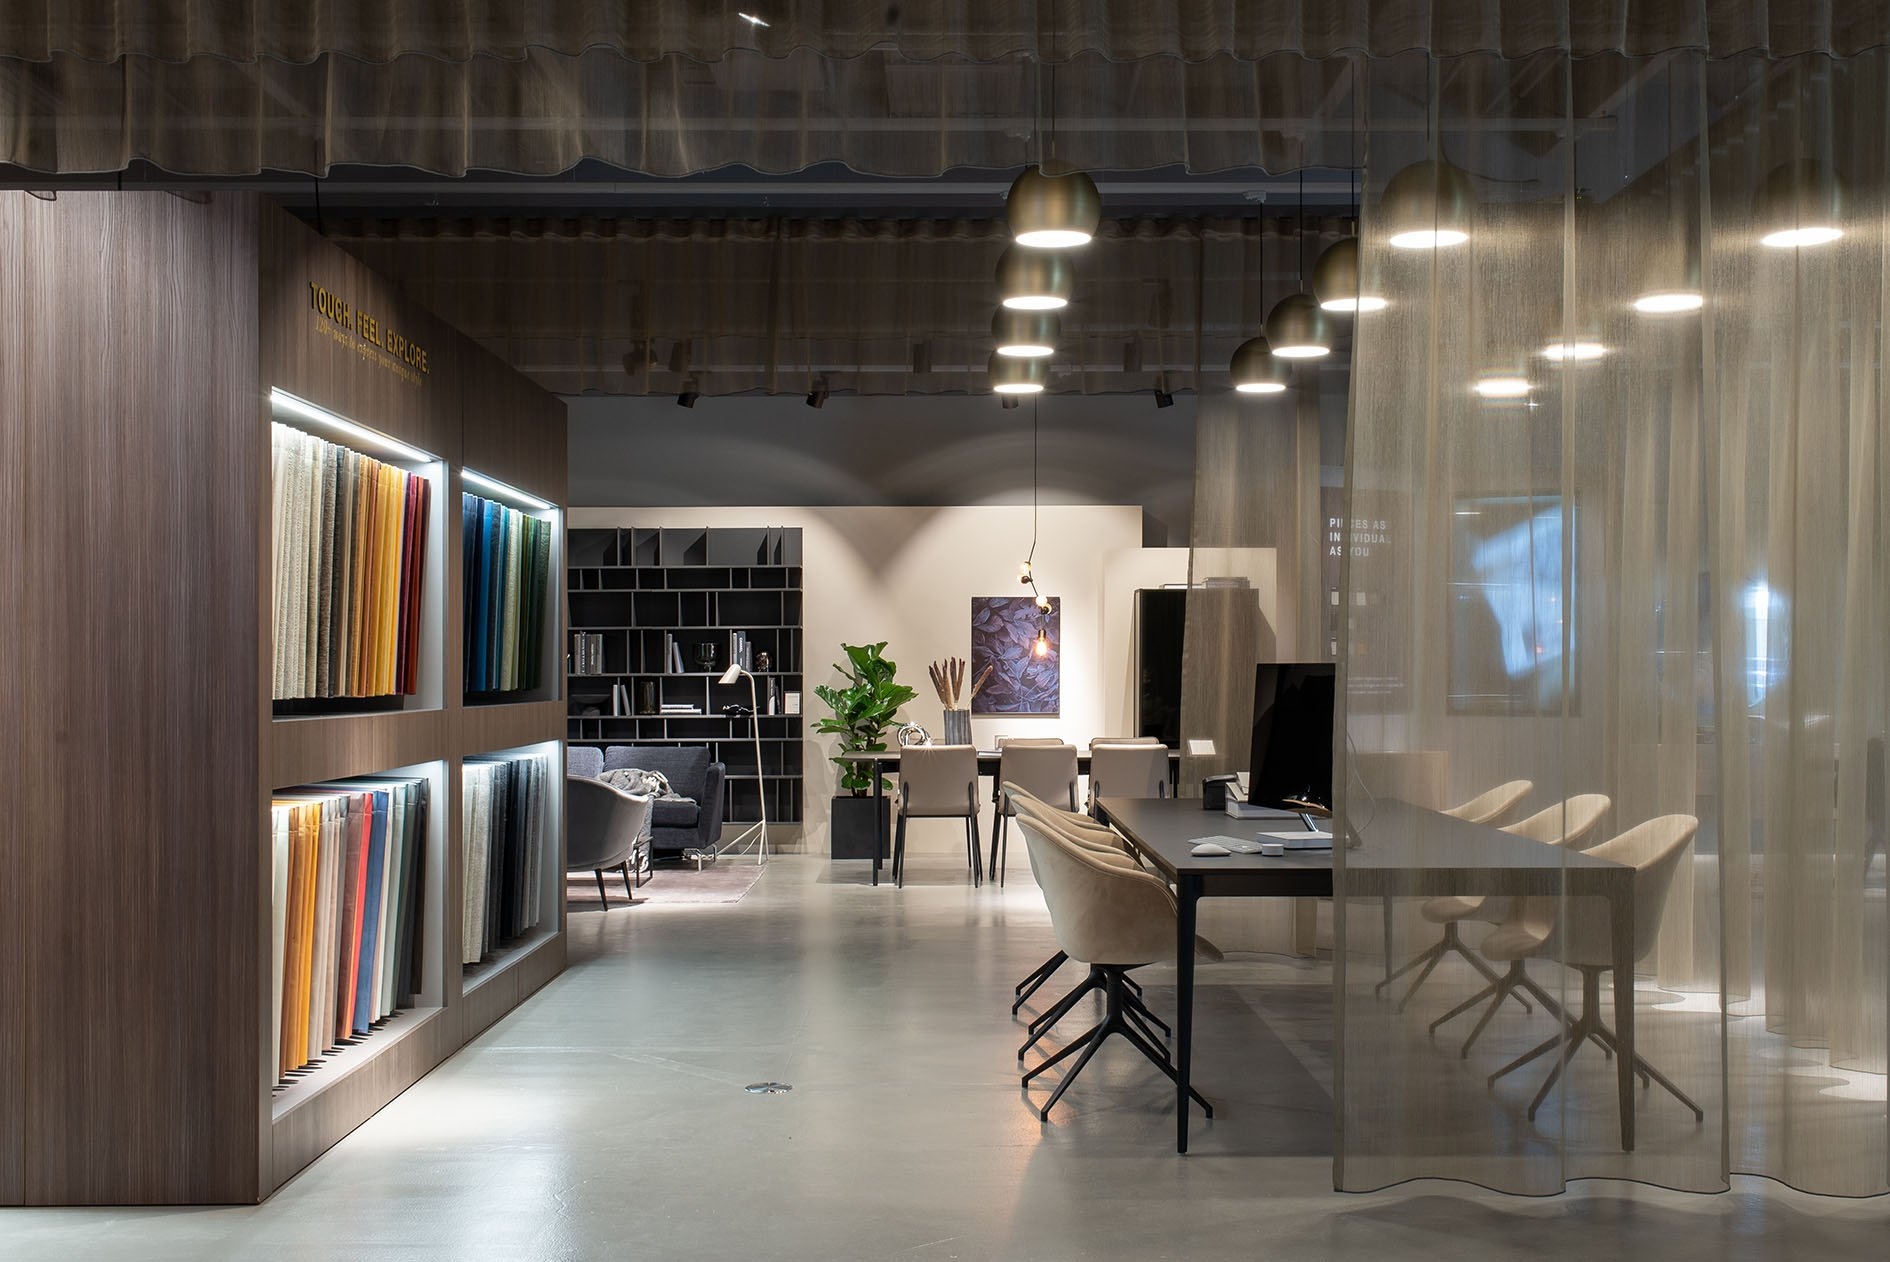 BoConcept store interior featuring furniture displays and fabric samples under warm lighting.